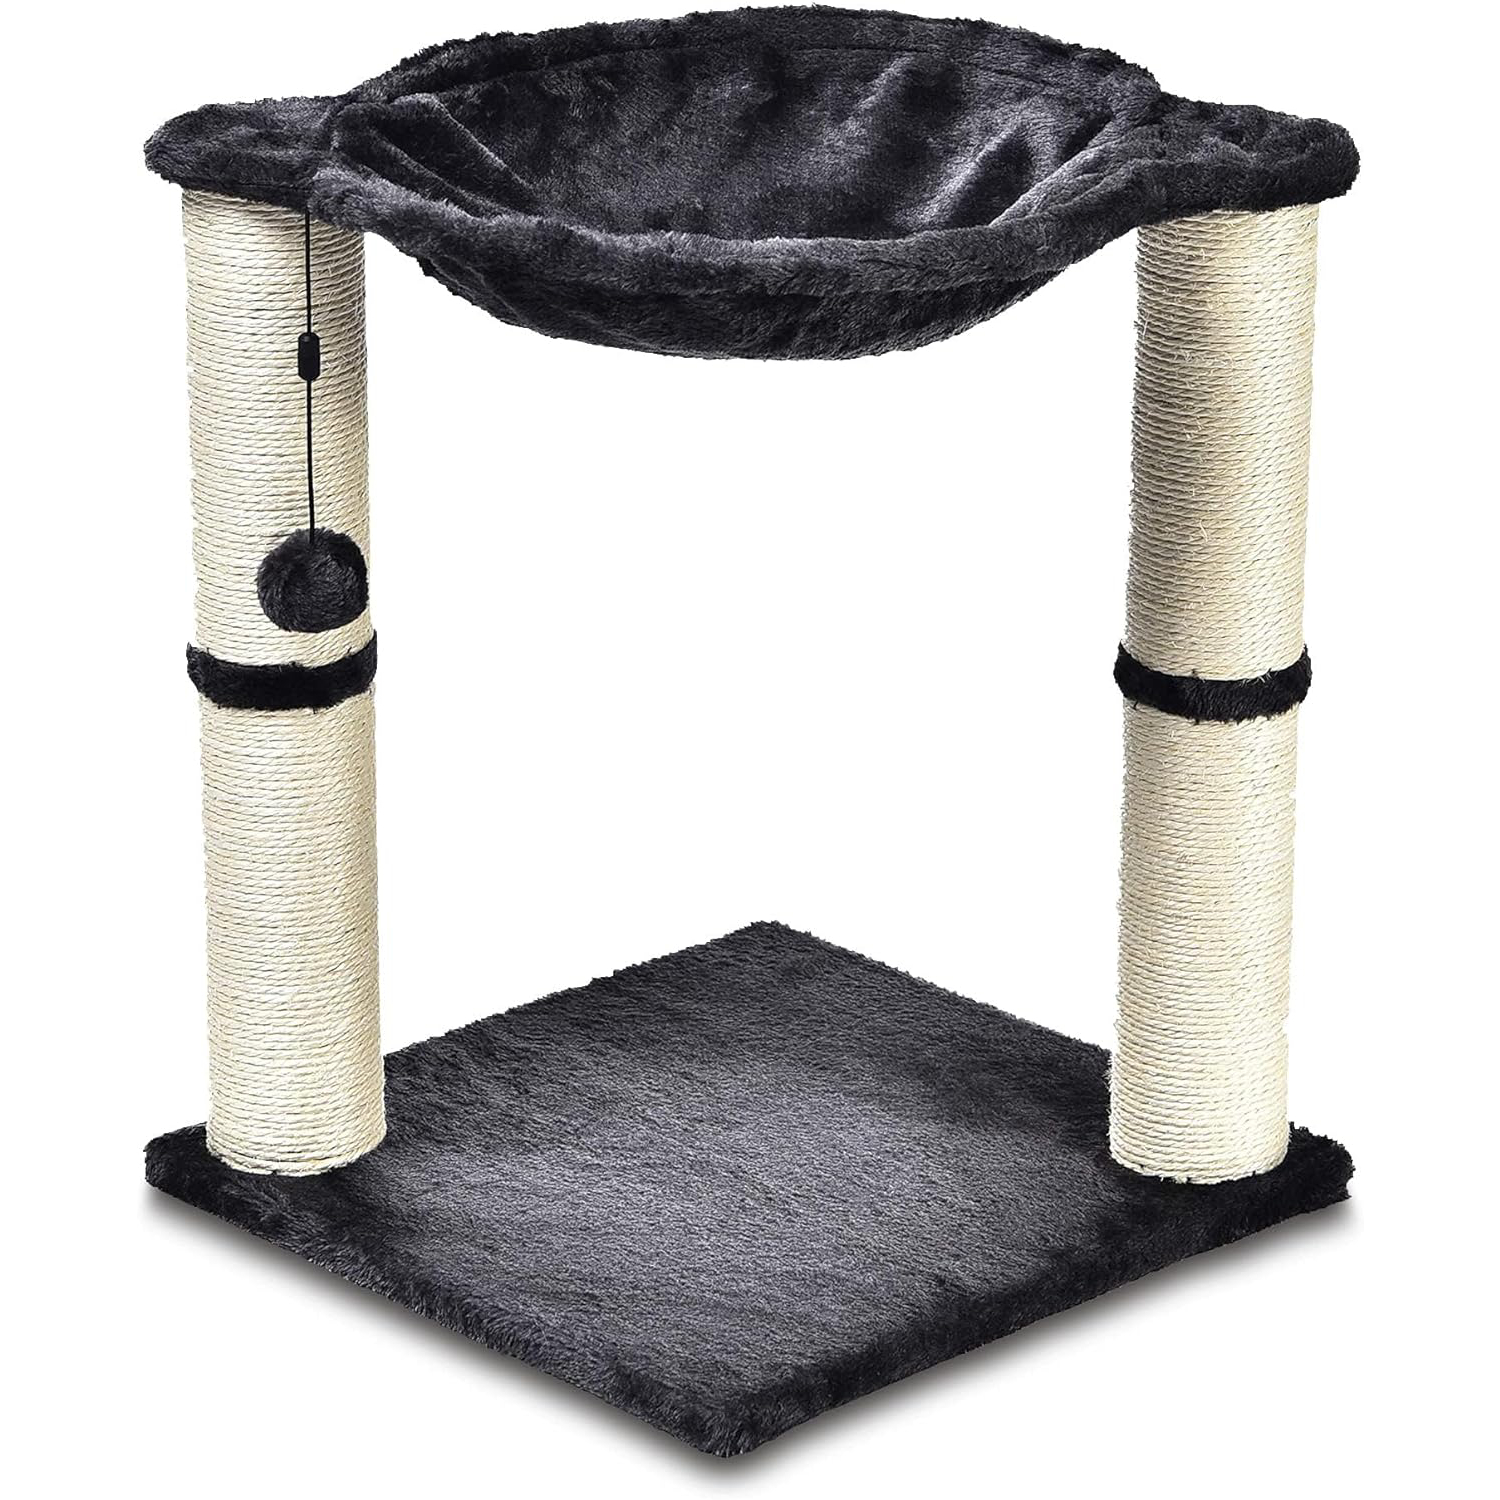 Amazon Basics Cat Tower with Hammock and Scratching Posts for Indoor Cats, 15.8 x 15.8 x 19.7 Inches, Gray New